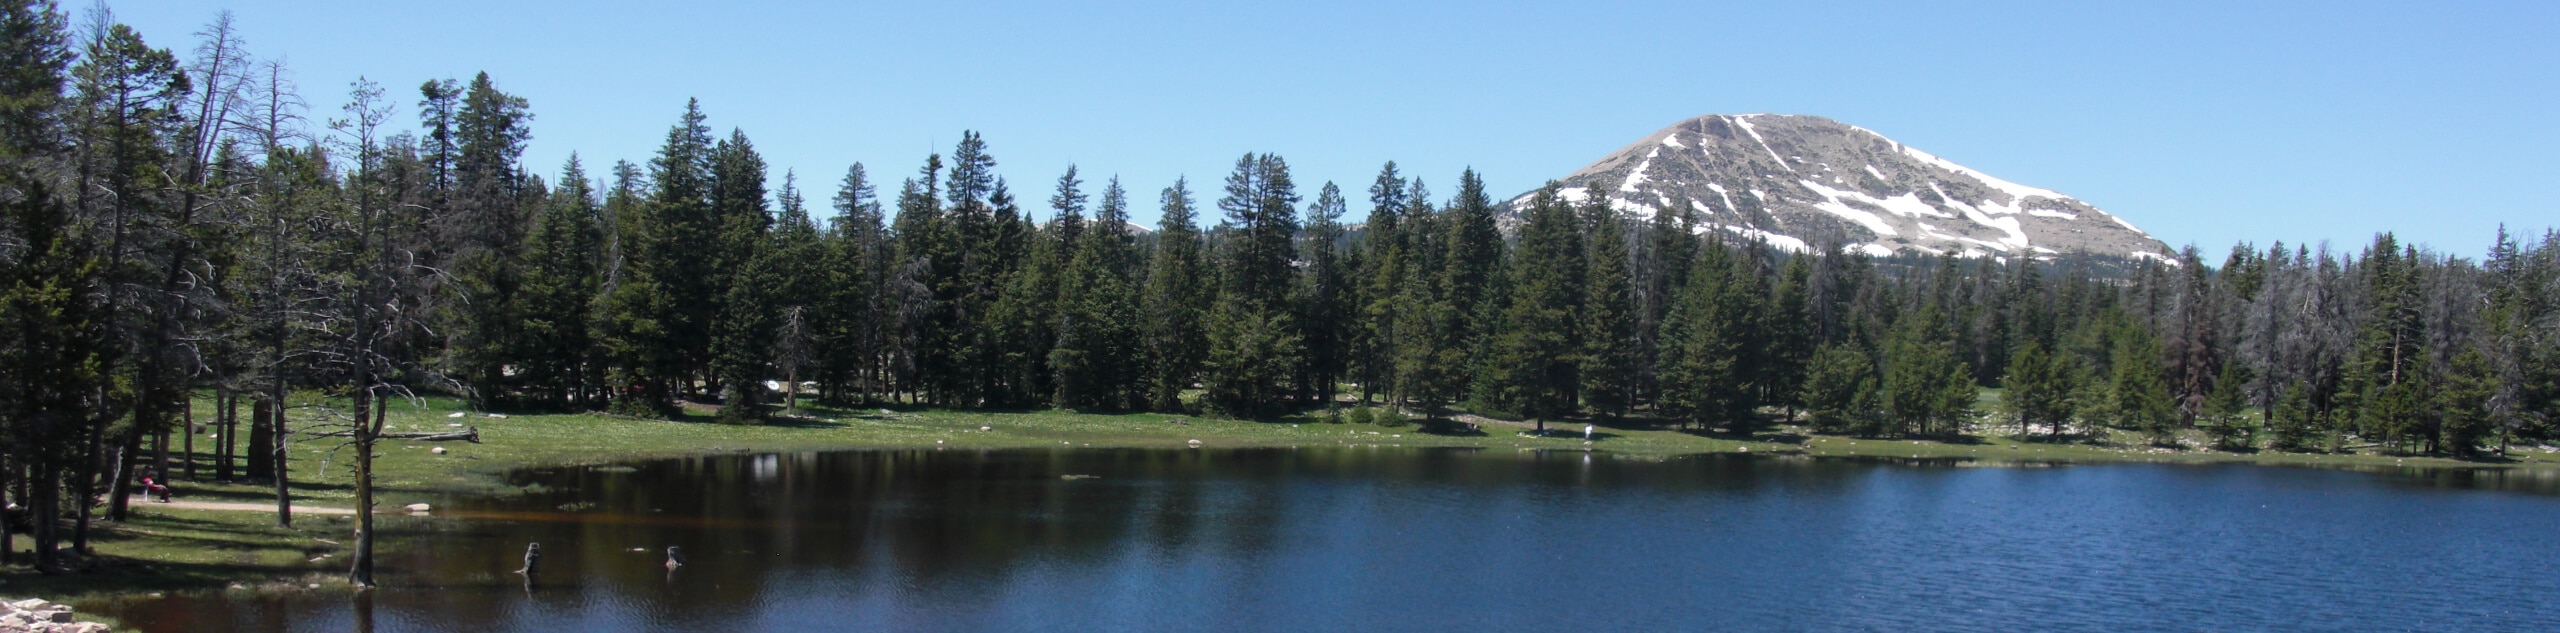 Lily Lake from Mill Creek Road